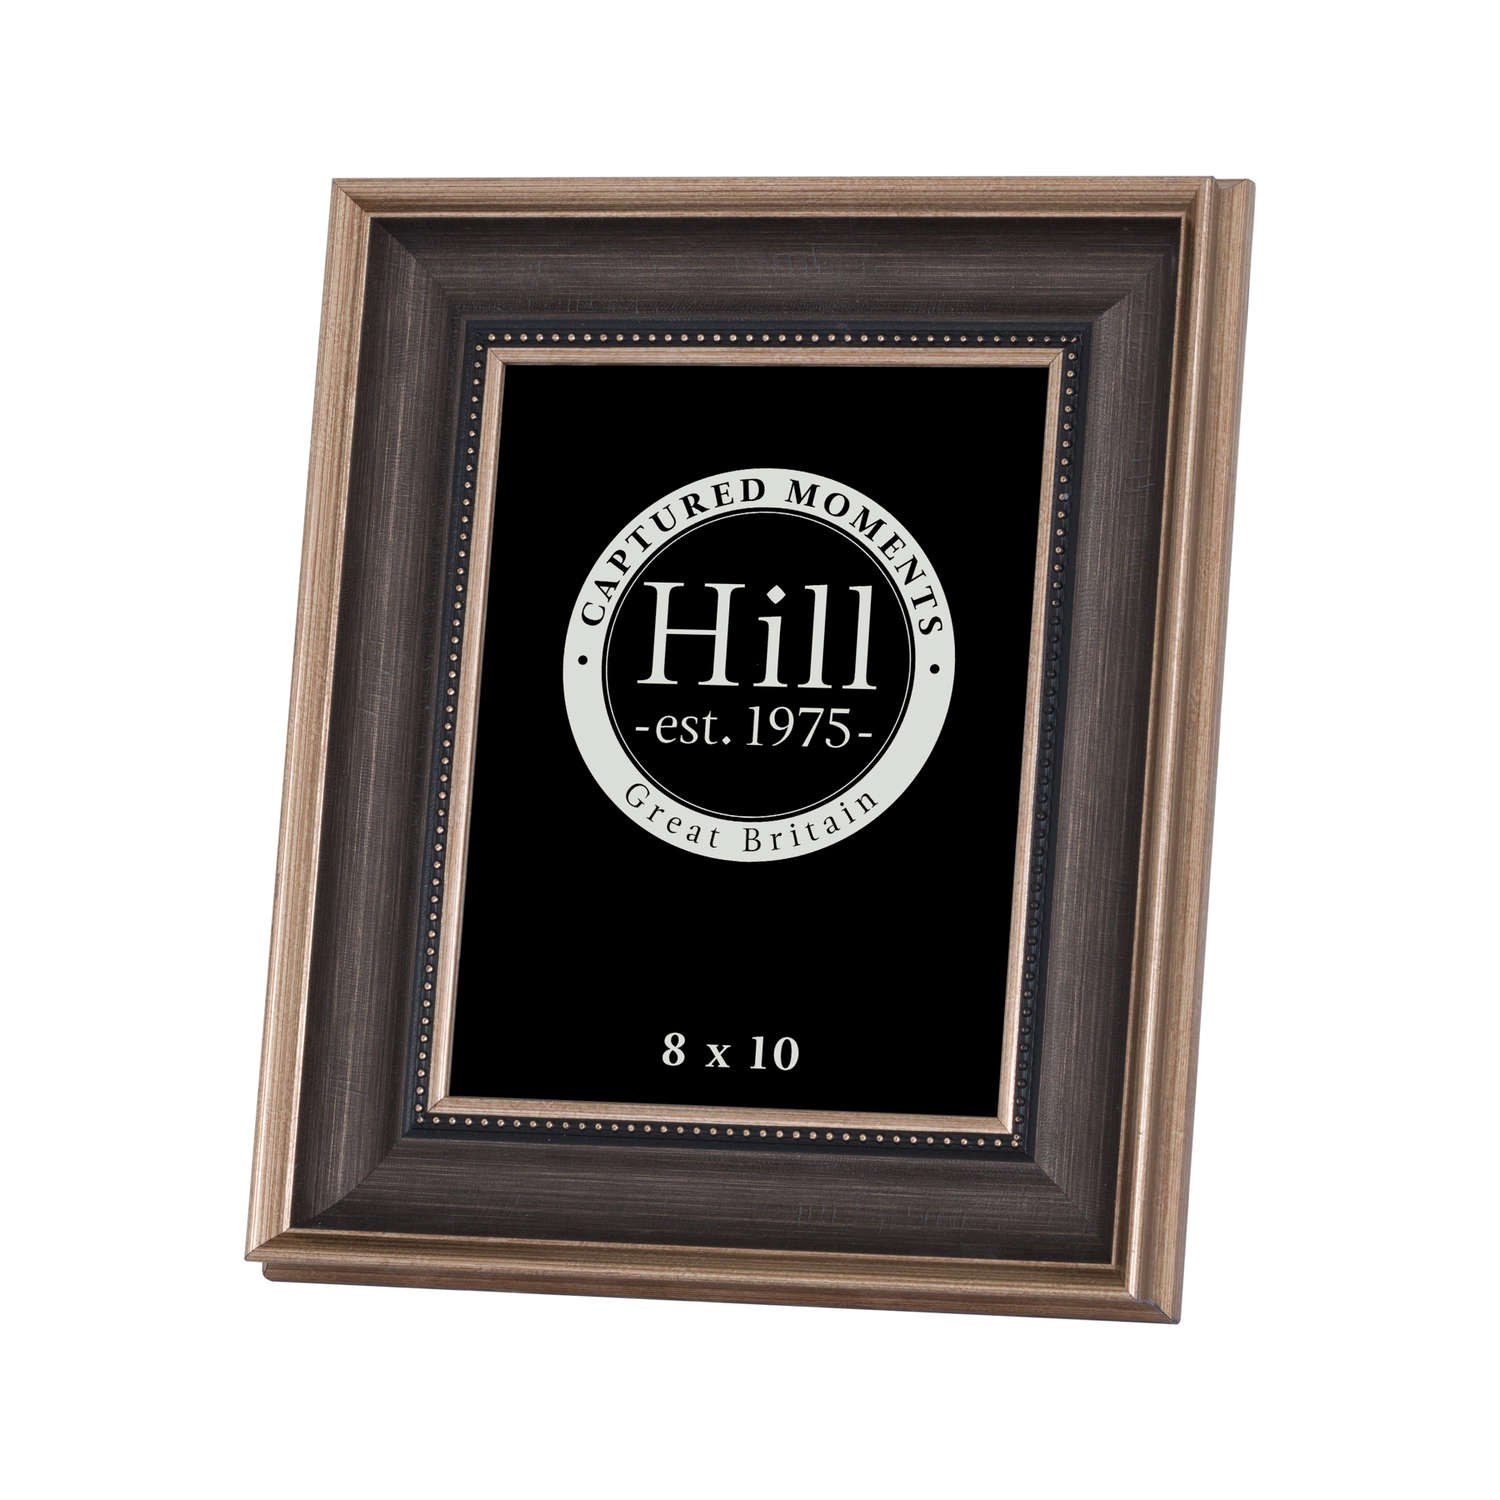 Antique Gold With Black Detail Photo Frame 8X10 - Image 1